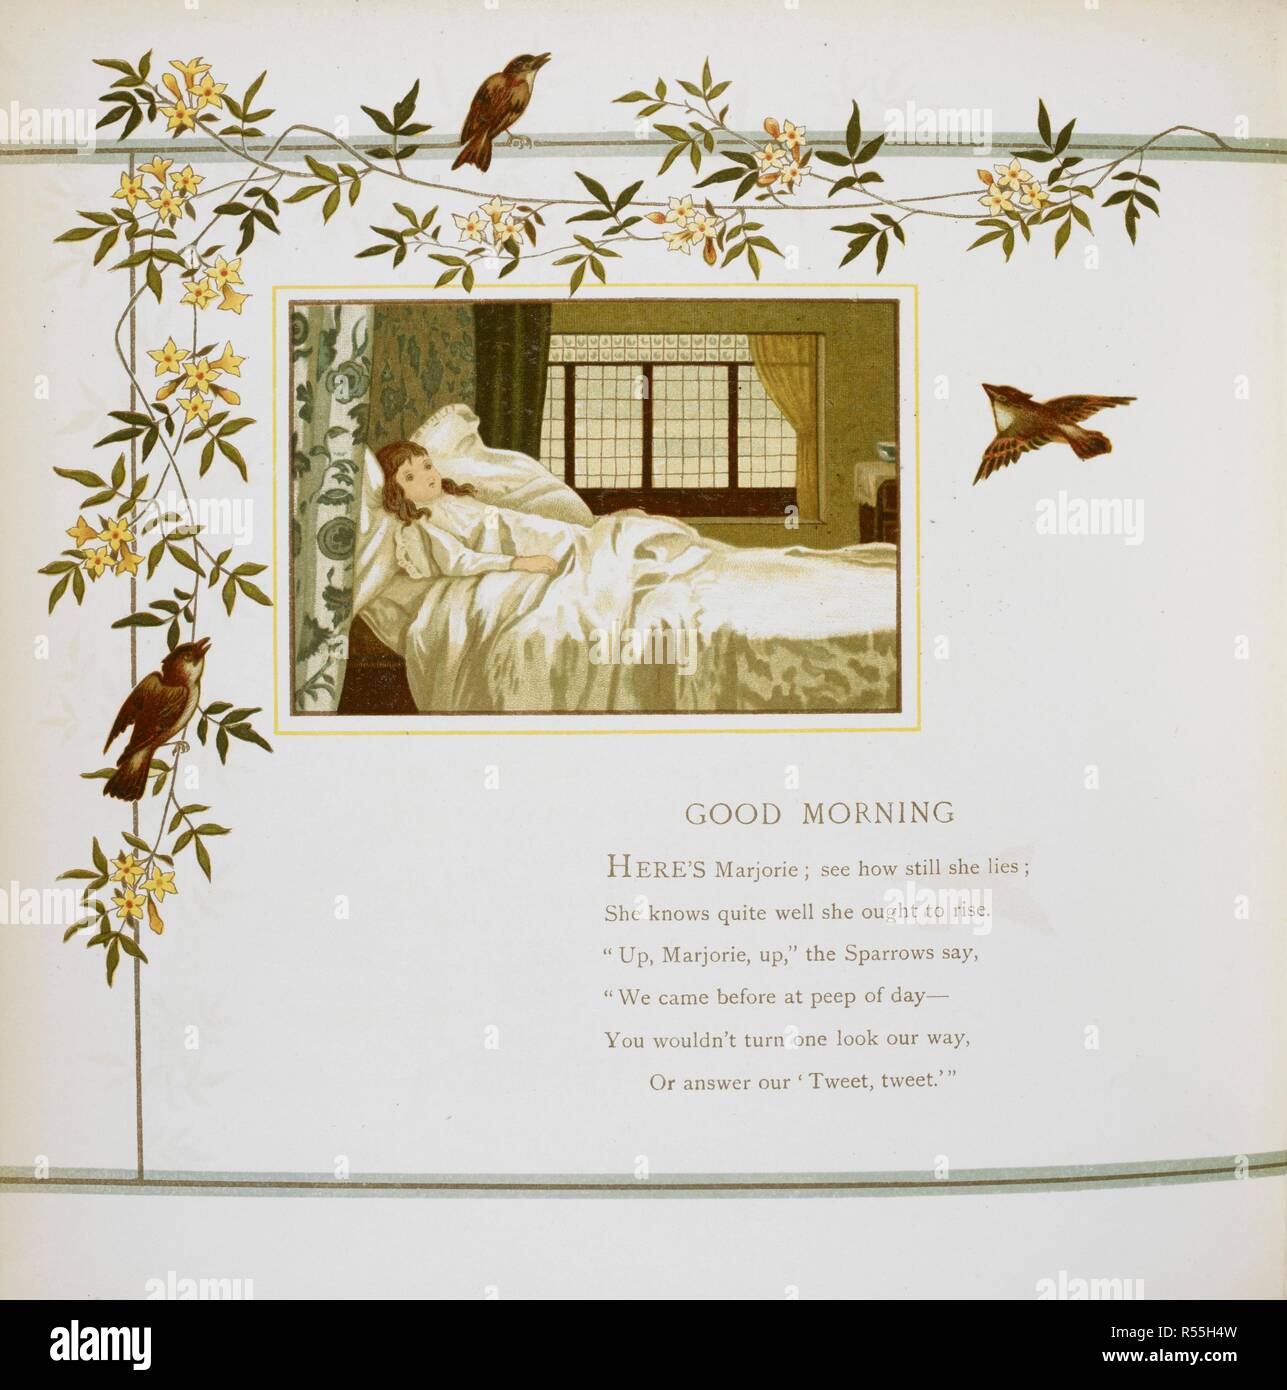 'Good Morning'. A girl lying in bed. At Home again. Verses. [Illustrated by] J. G. Sowerby and T. Crane. London : Marcus Ward & Co., [1886]. Source: 12806.t.30, page 10. Language: English. Author: Sowerby, John: Crane, T. Stock Photo